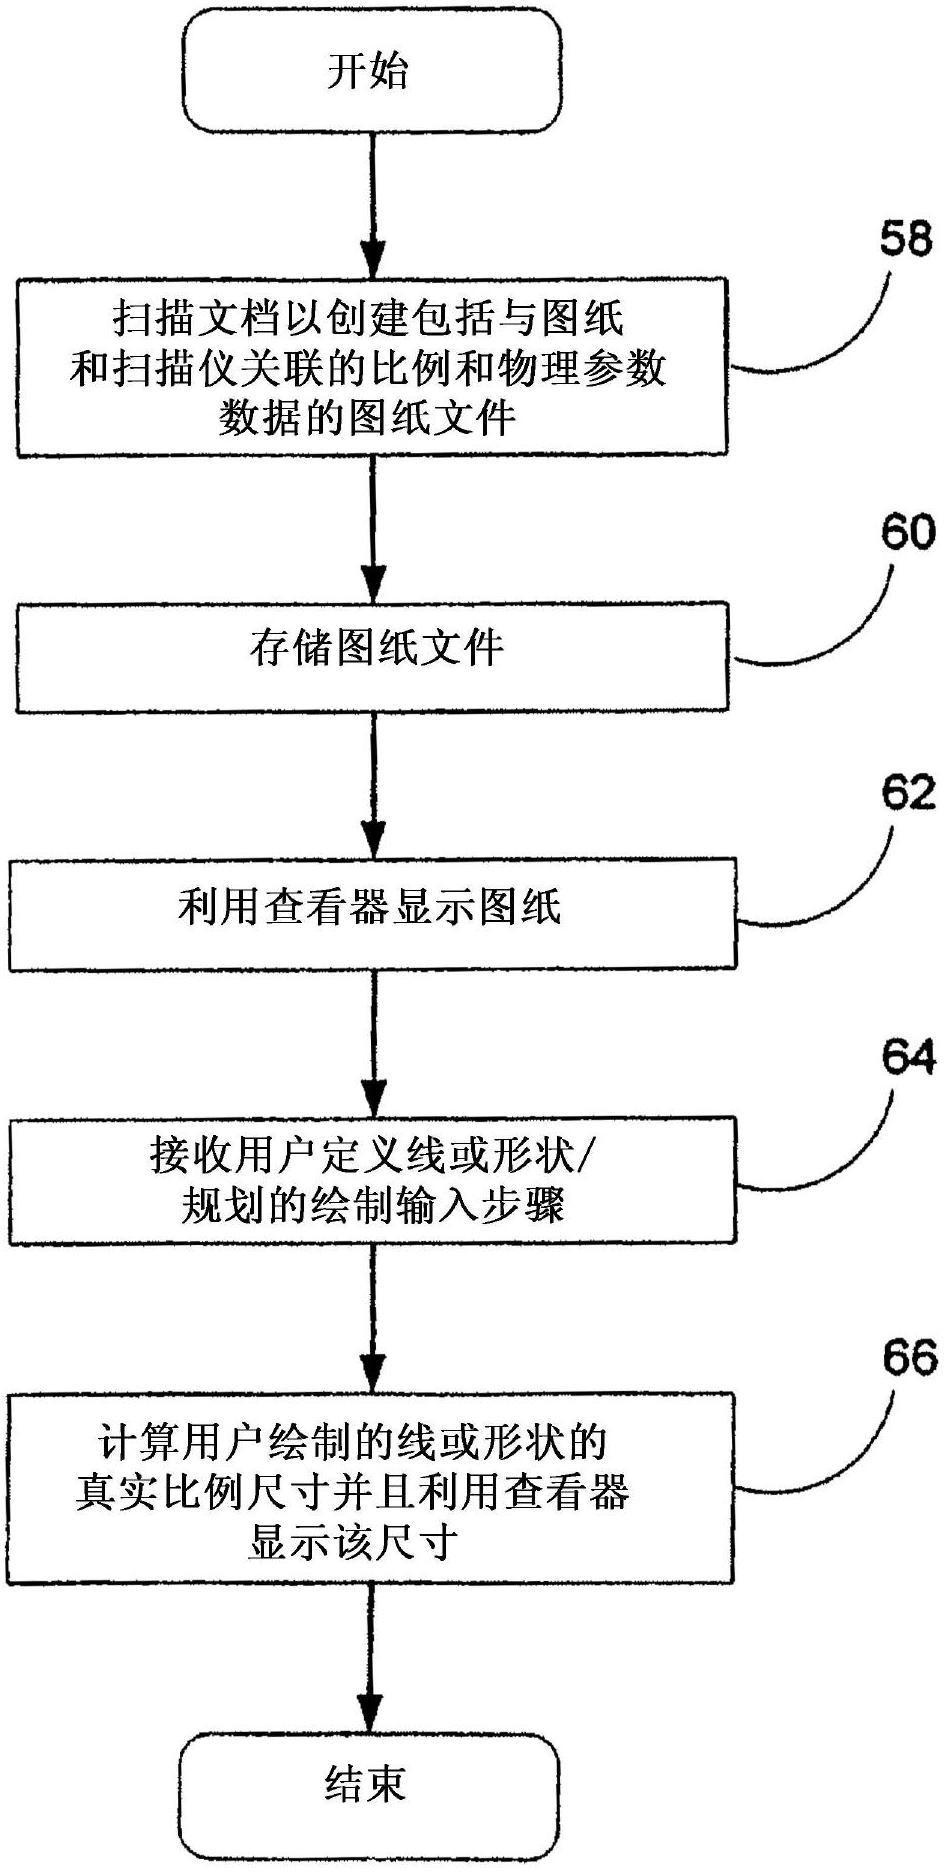 System and method employing three-dimensional and two-dimensional digital images